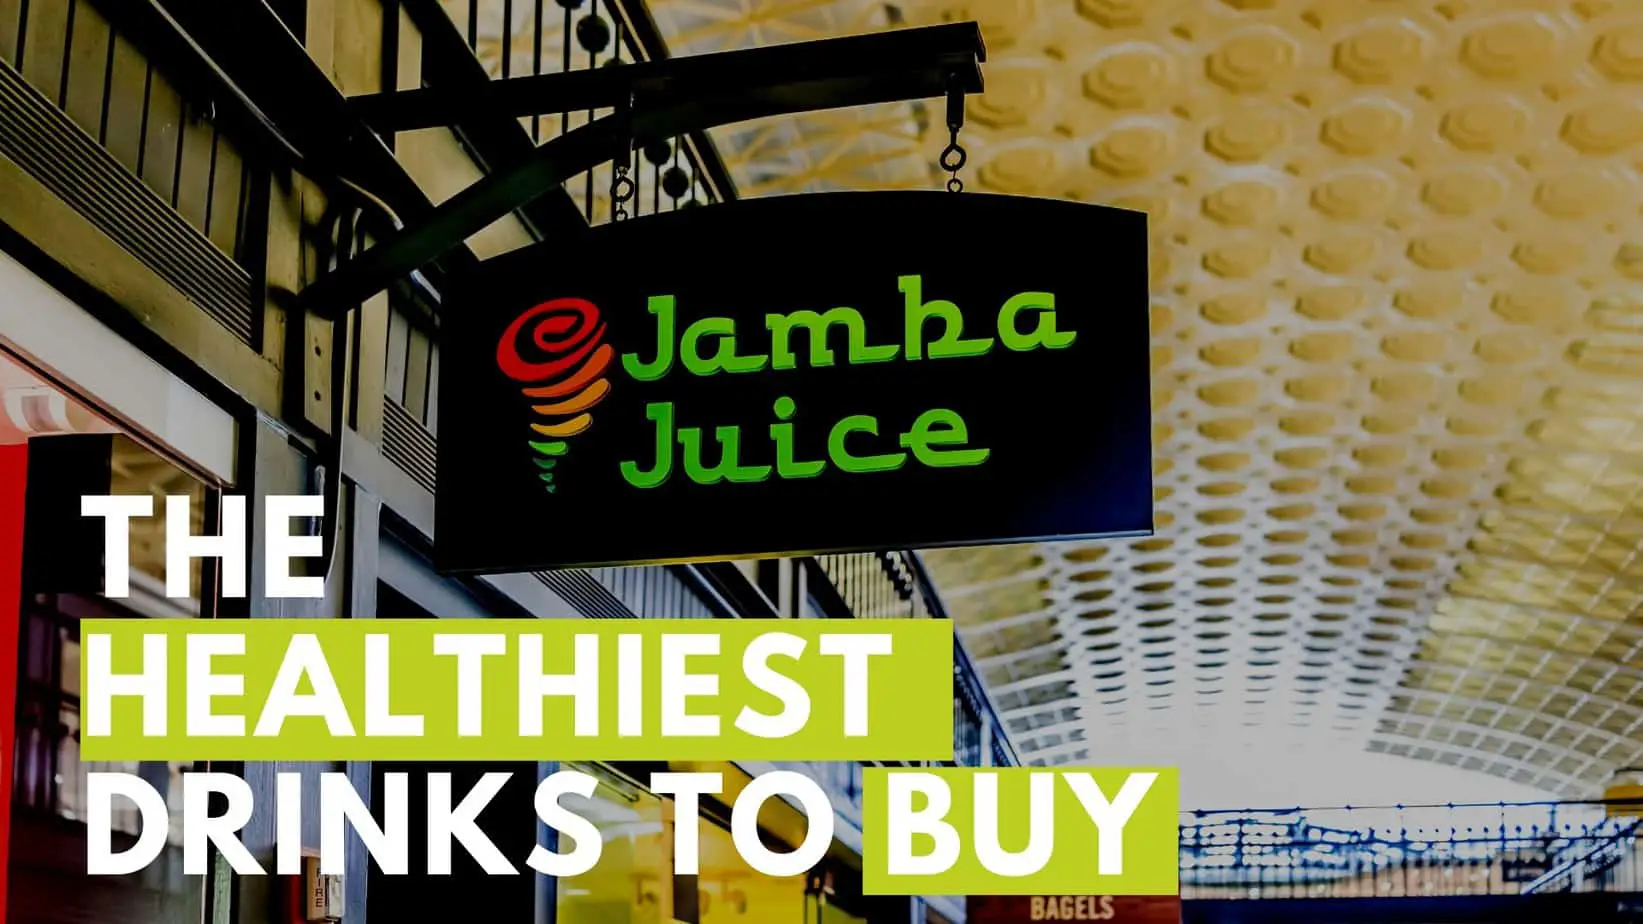 The Top 7 Healthiest Drinks From Jamba Juice